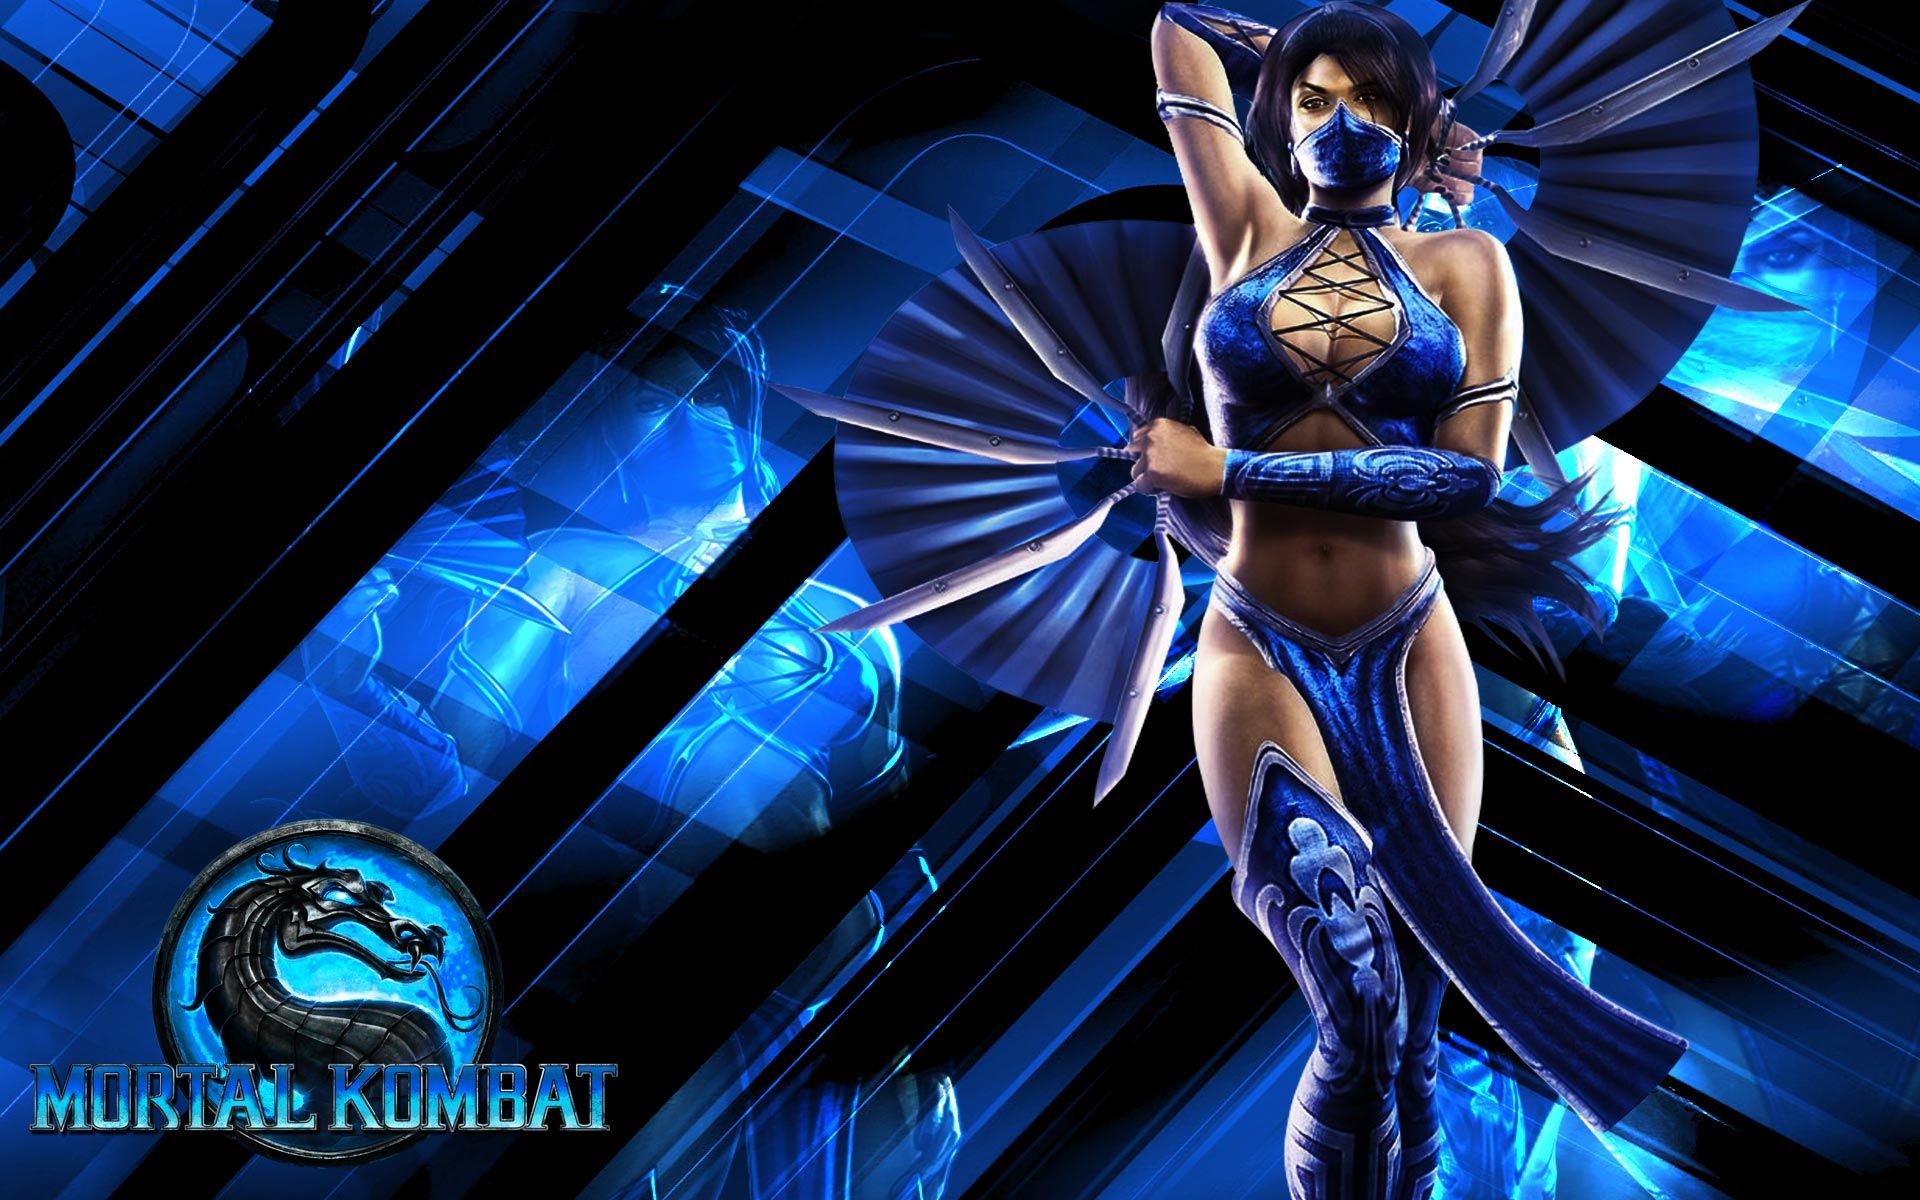 do u guys think kitana is gonna be playable in mk11?